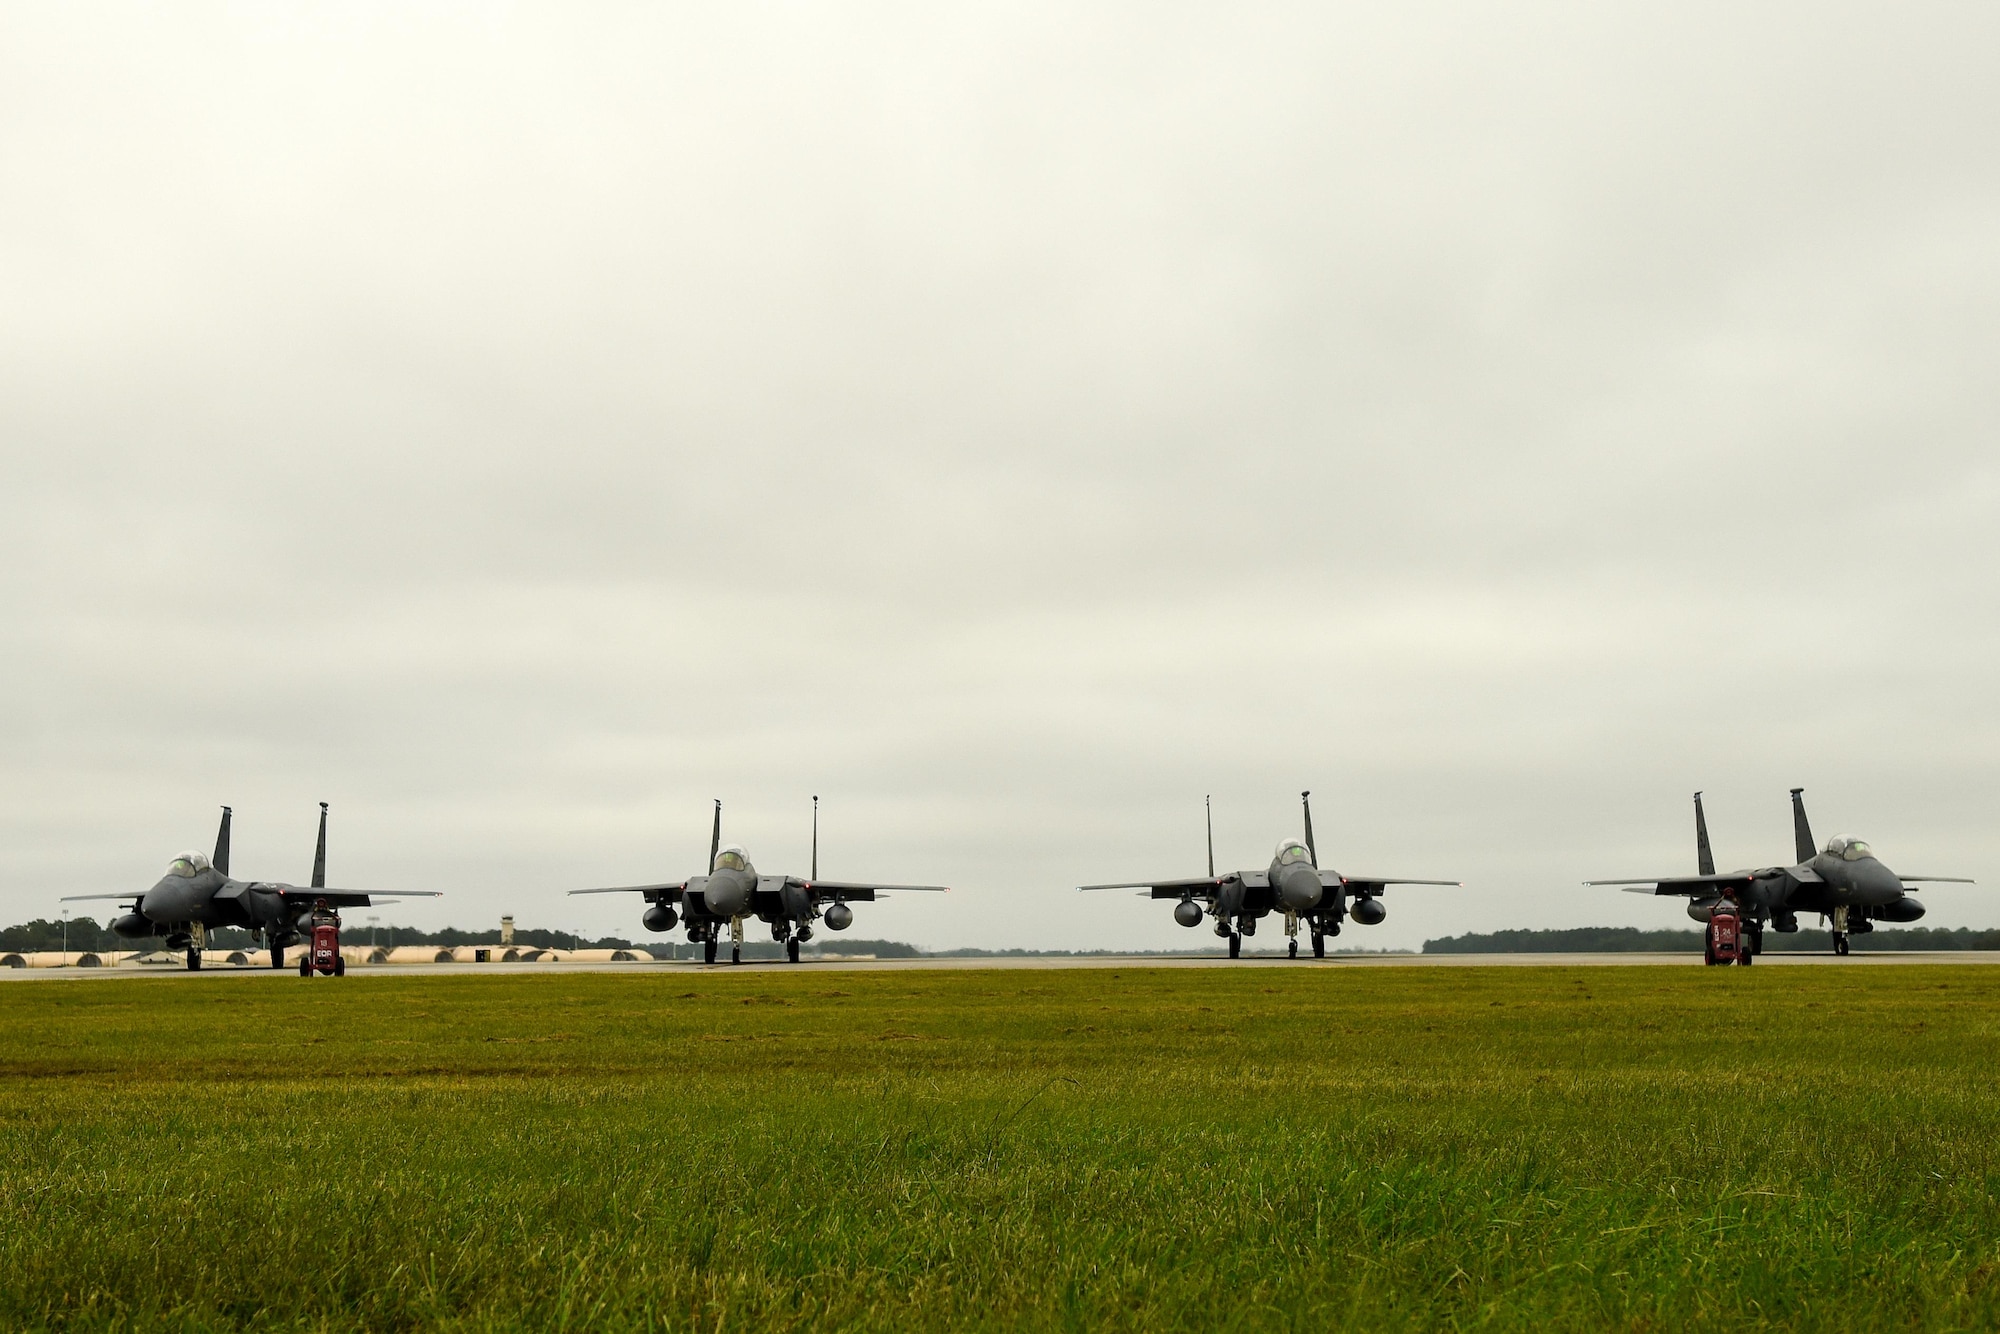 Four F-15E Strike Eagles from the 334th Fighter Squadron prepare to take off as a precautionary measure to avoid severe weather associated with Hurricane Matthew, Oct. 6, 2016, at Seymour Johnson Air Force Base, North Carolina. More than 40 F-15E Strike Eagles and six KC-135R Stratotanker aircraft were repositioned to Barksdale Air Force Base, Louisiana to avoid potential damage from severe weather associated with Matthew. (U.S. Air Force photo by Airman Shawna L. Keyes)